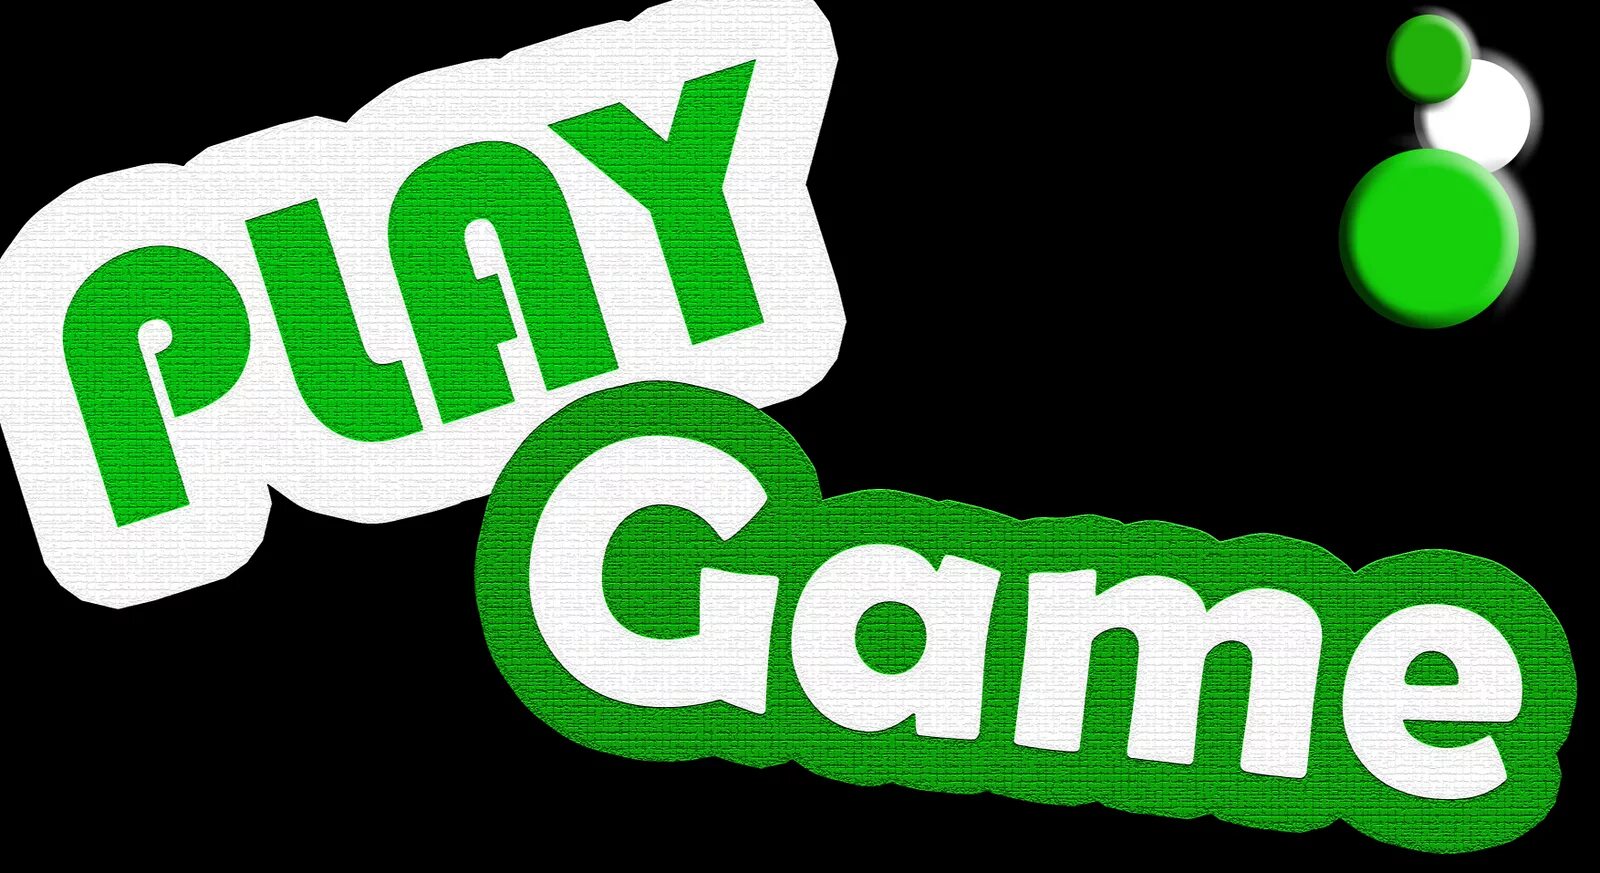 They play the game when. Games надпись. Игра Play надпись. Надпись плей геймс. Play games картинки.